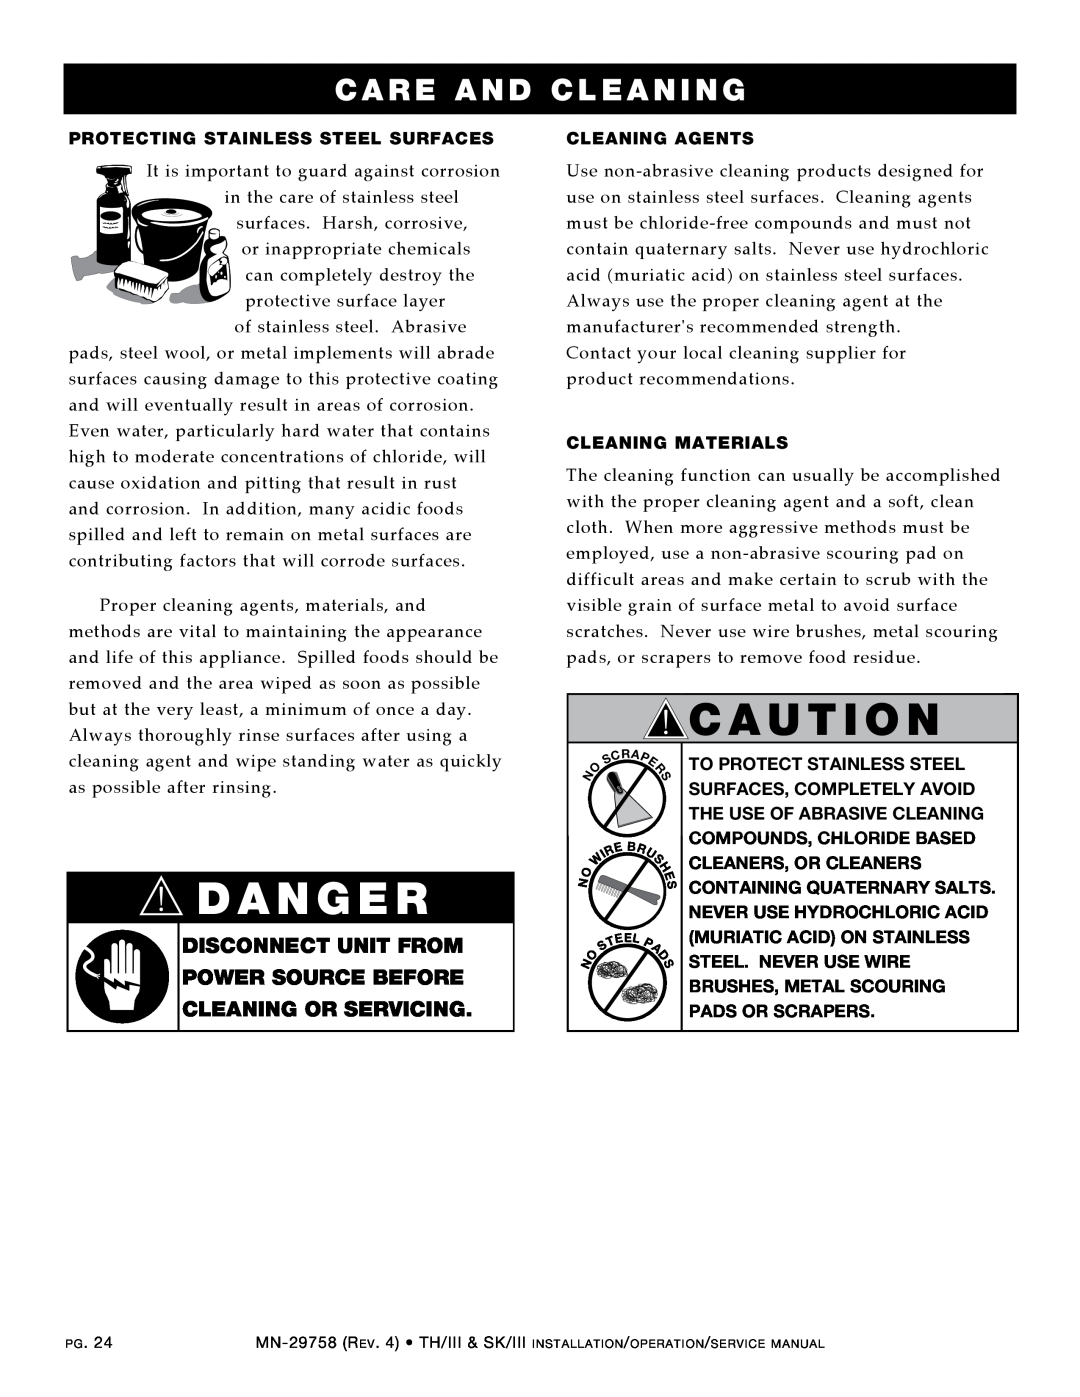 Alto-Shaam 300-TH/III manual dANgER, CARE and cleaning, dIScONNEcT UNIT FROM pOwER SOURcE BEFORE, cLEANINg OR SERVIcINg 